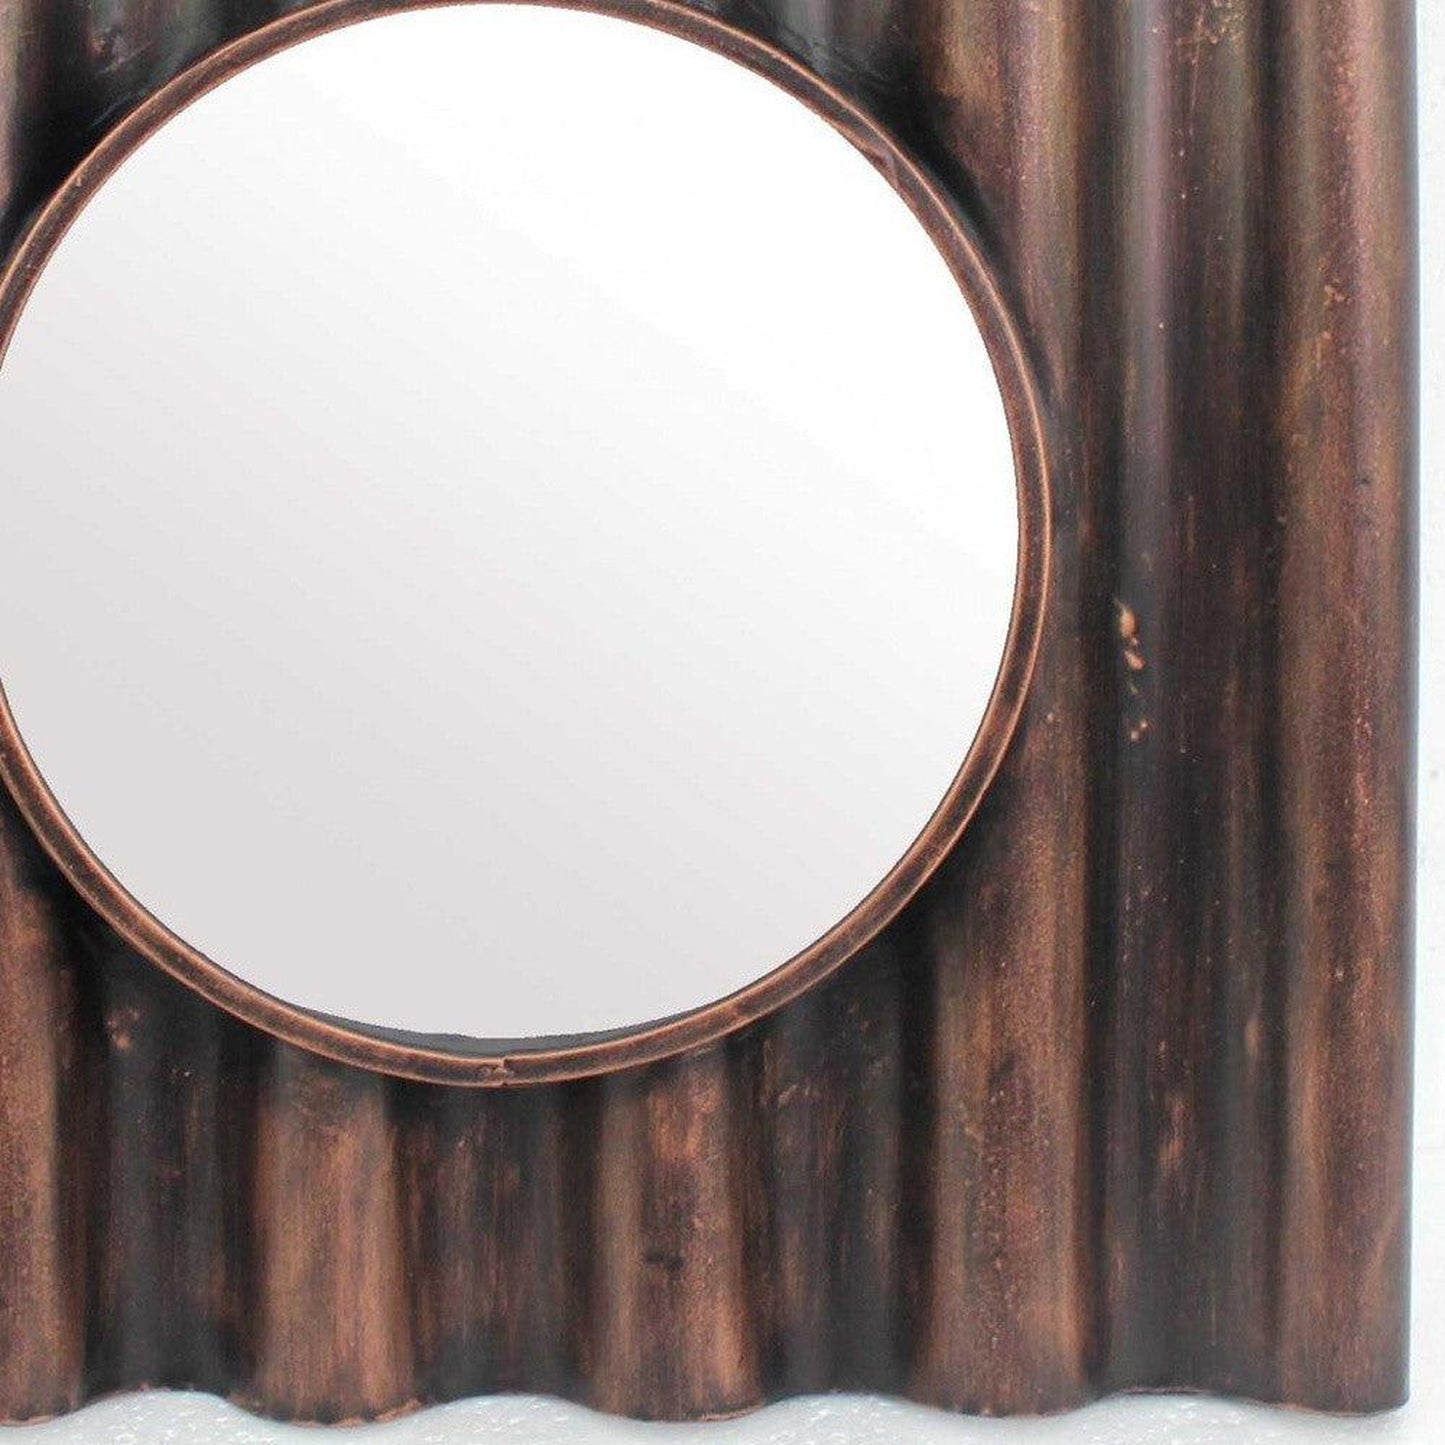 HomeRoots Panpipe-Like Wooden Cosmetic Mirror In Bronze Finish